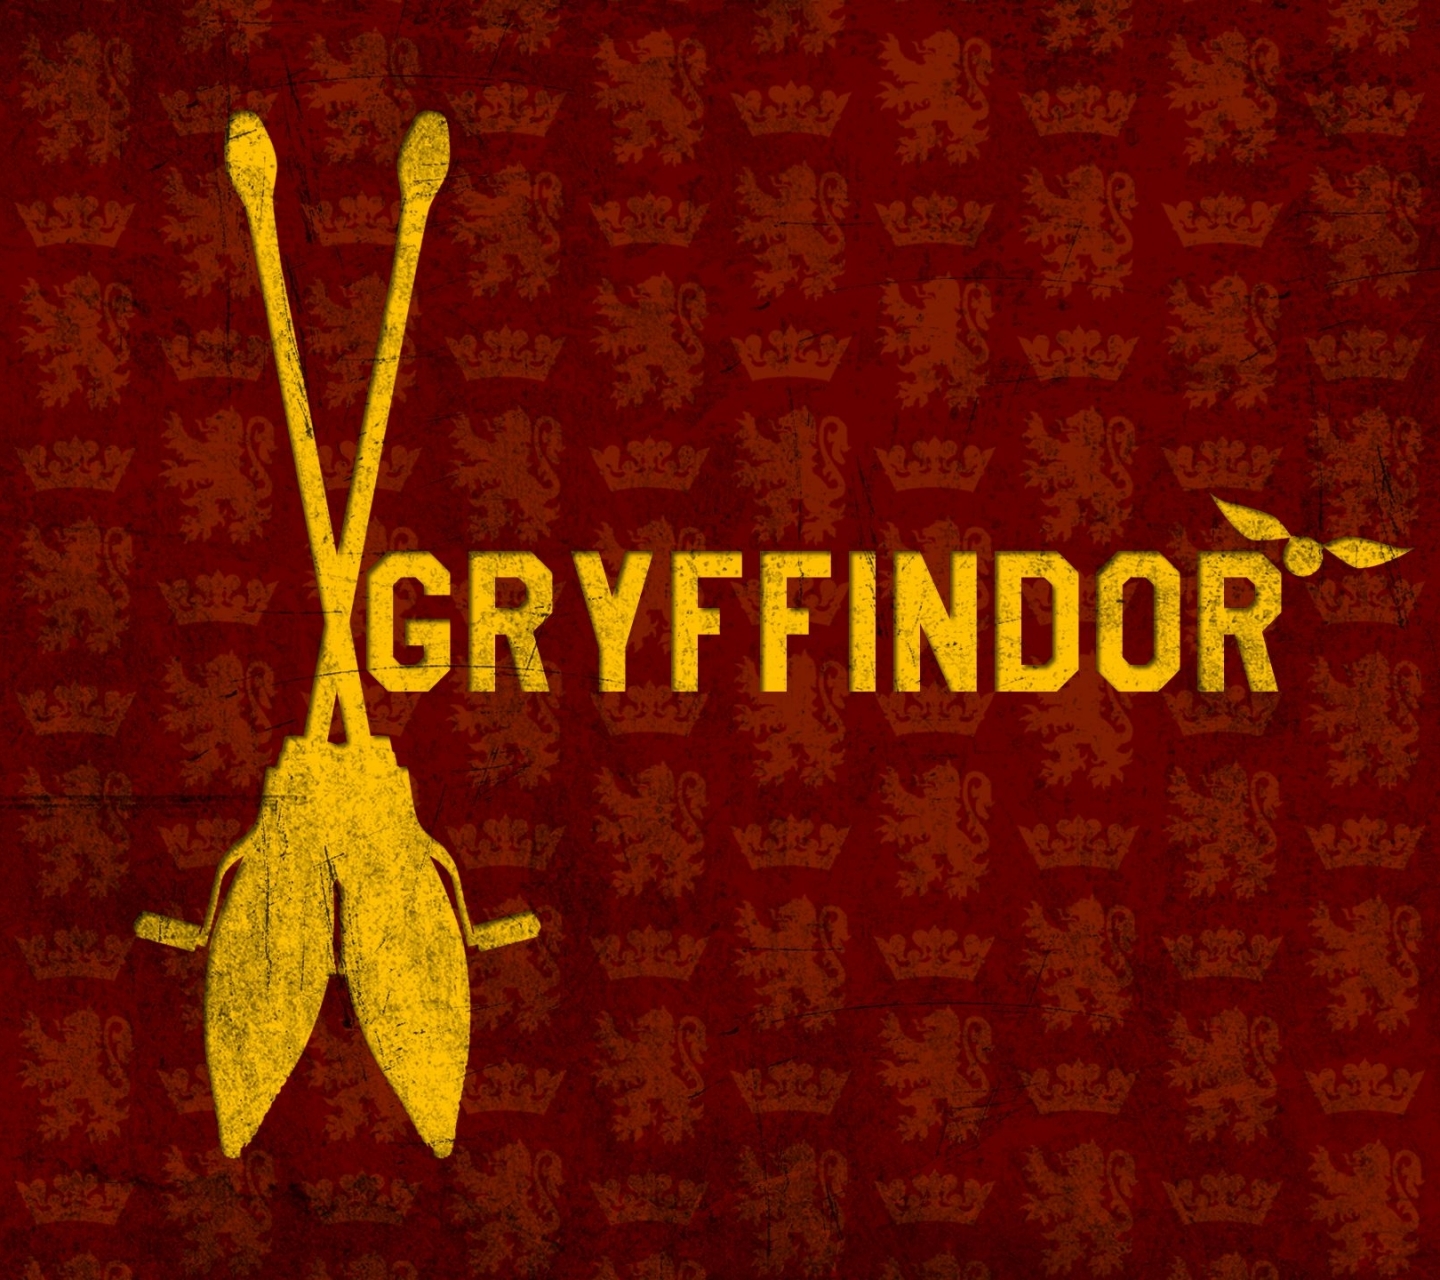 A Gryffindor wallpaper with the house name and symbol on a dark red background with a pattern of crowns. - Gryffindor